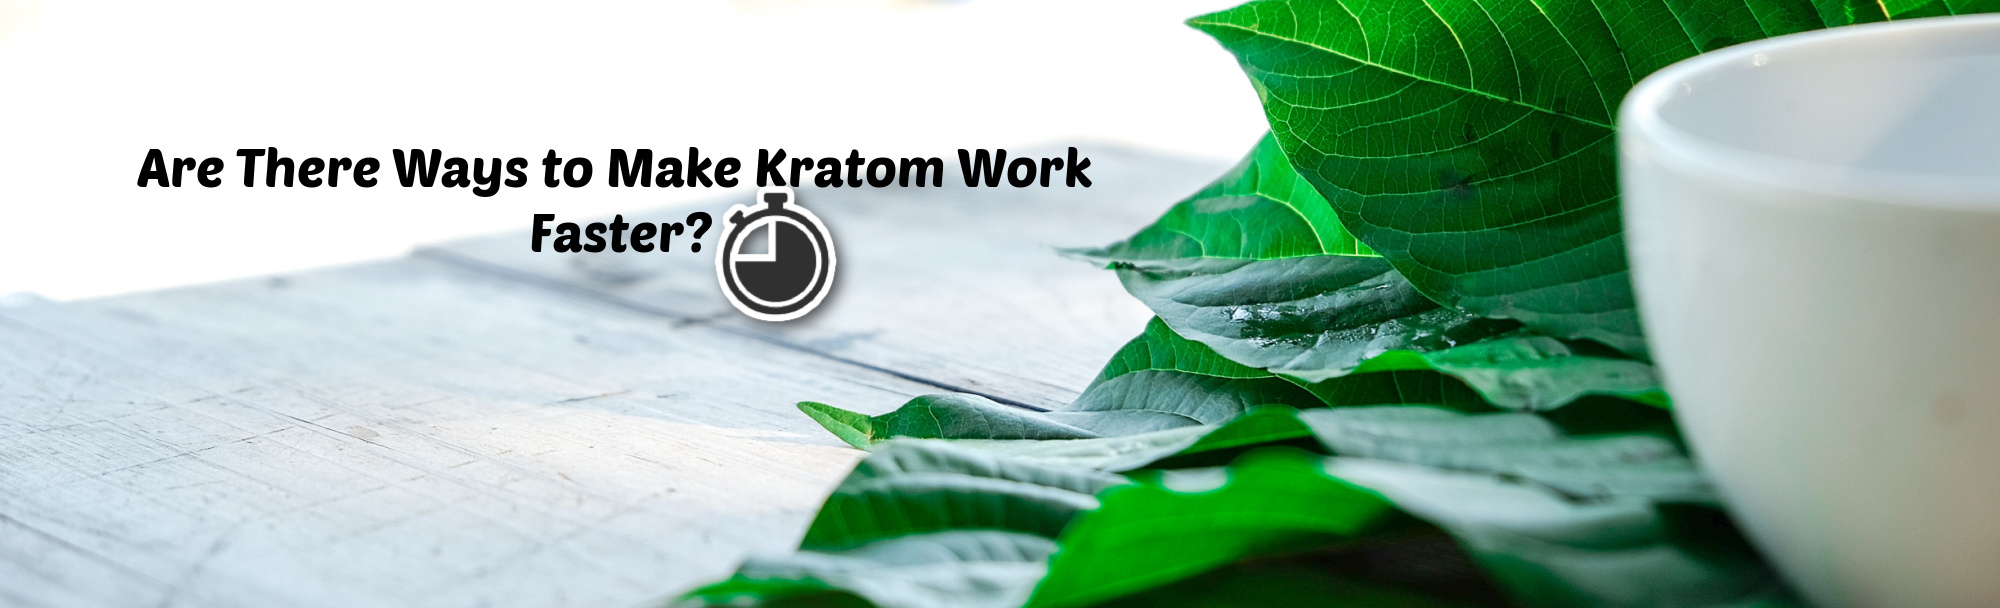 image of are there ways to make kratom work faster